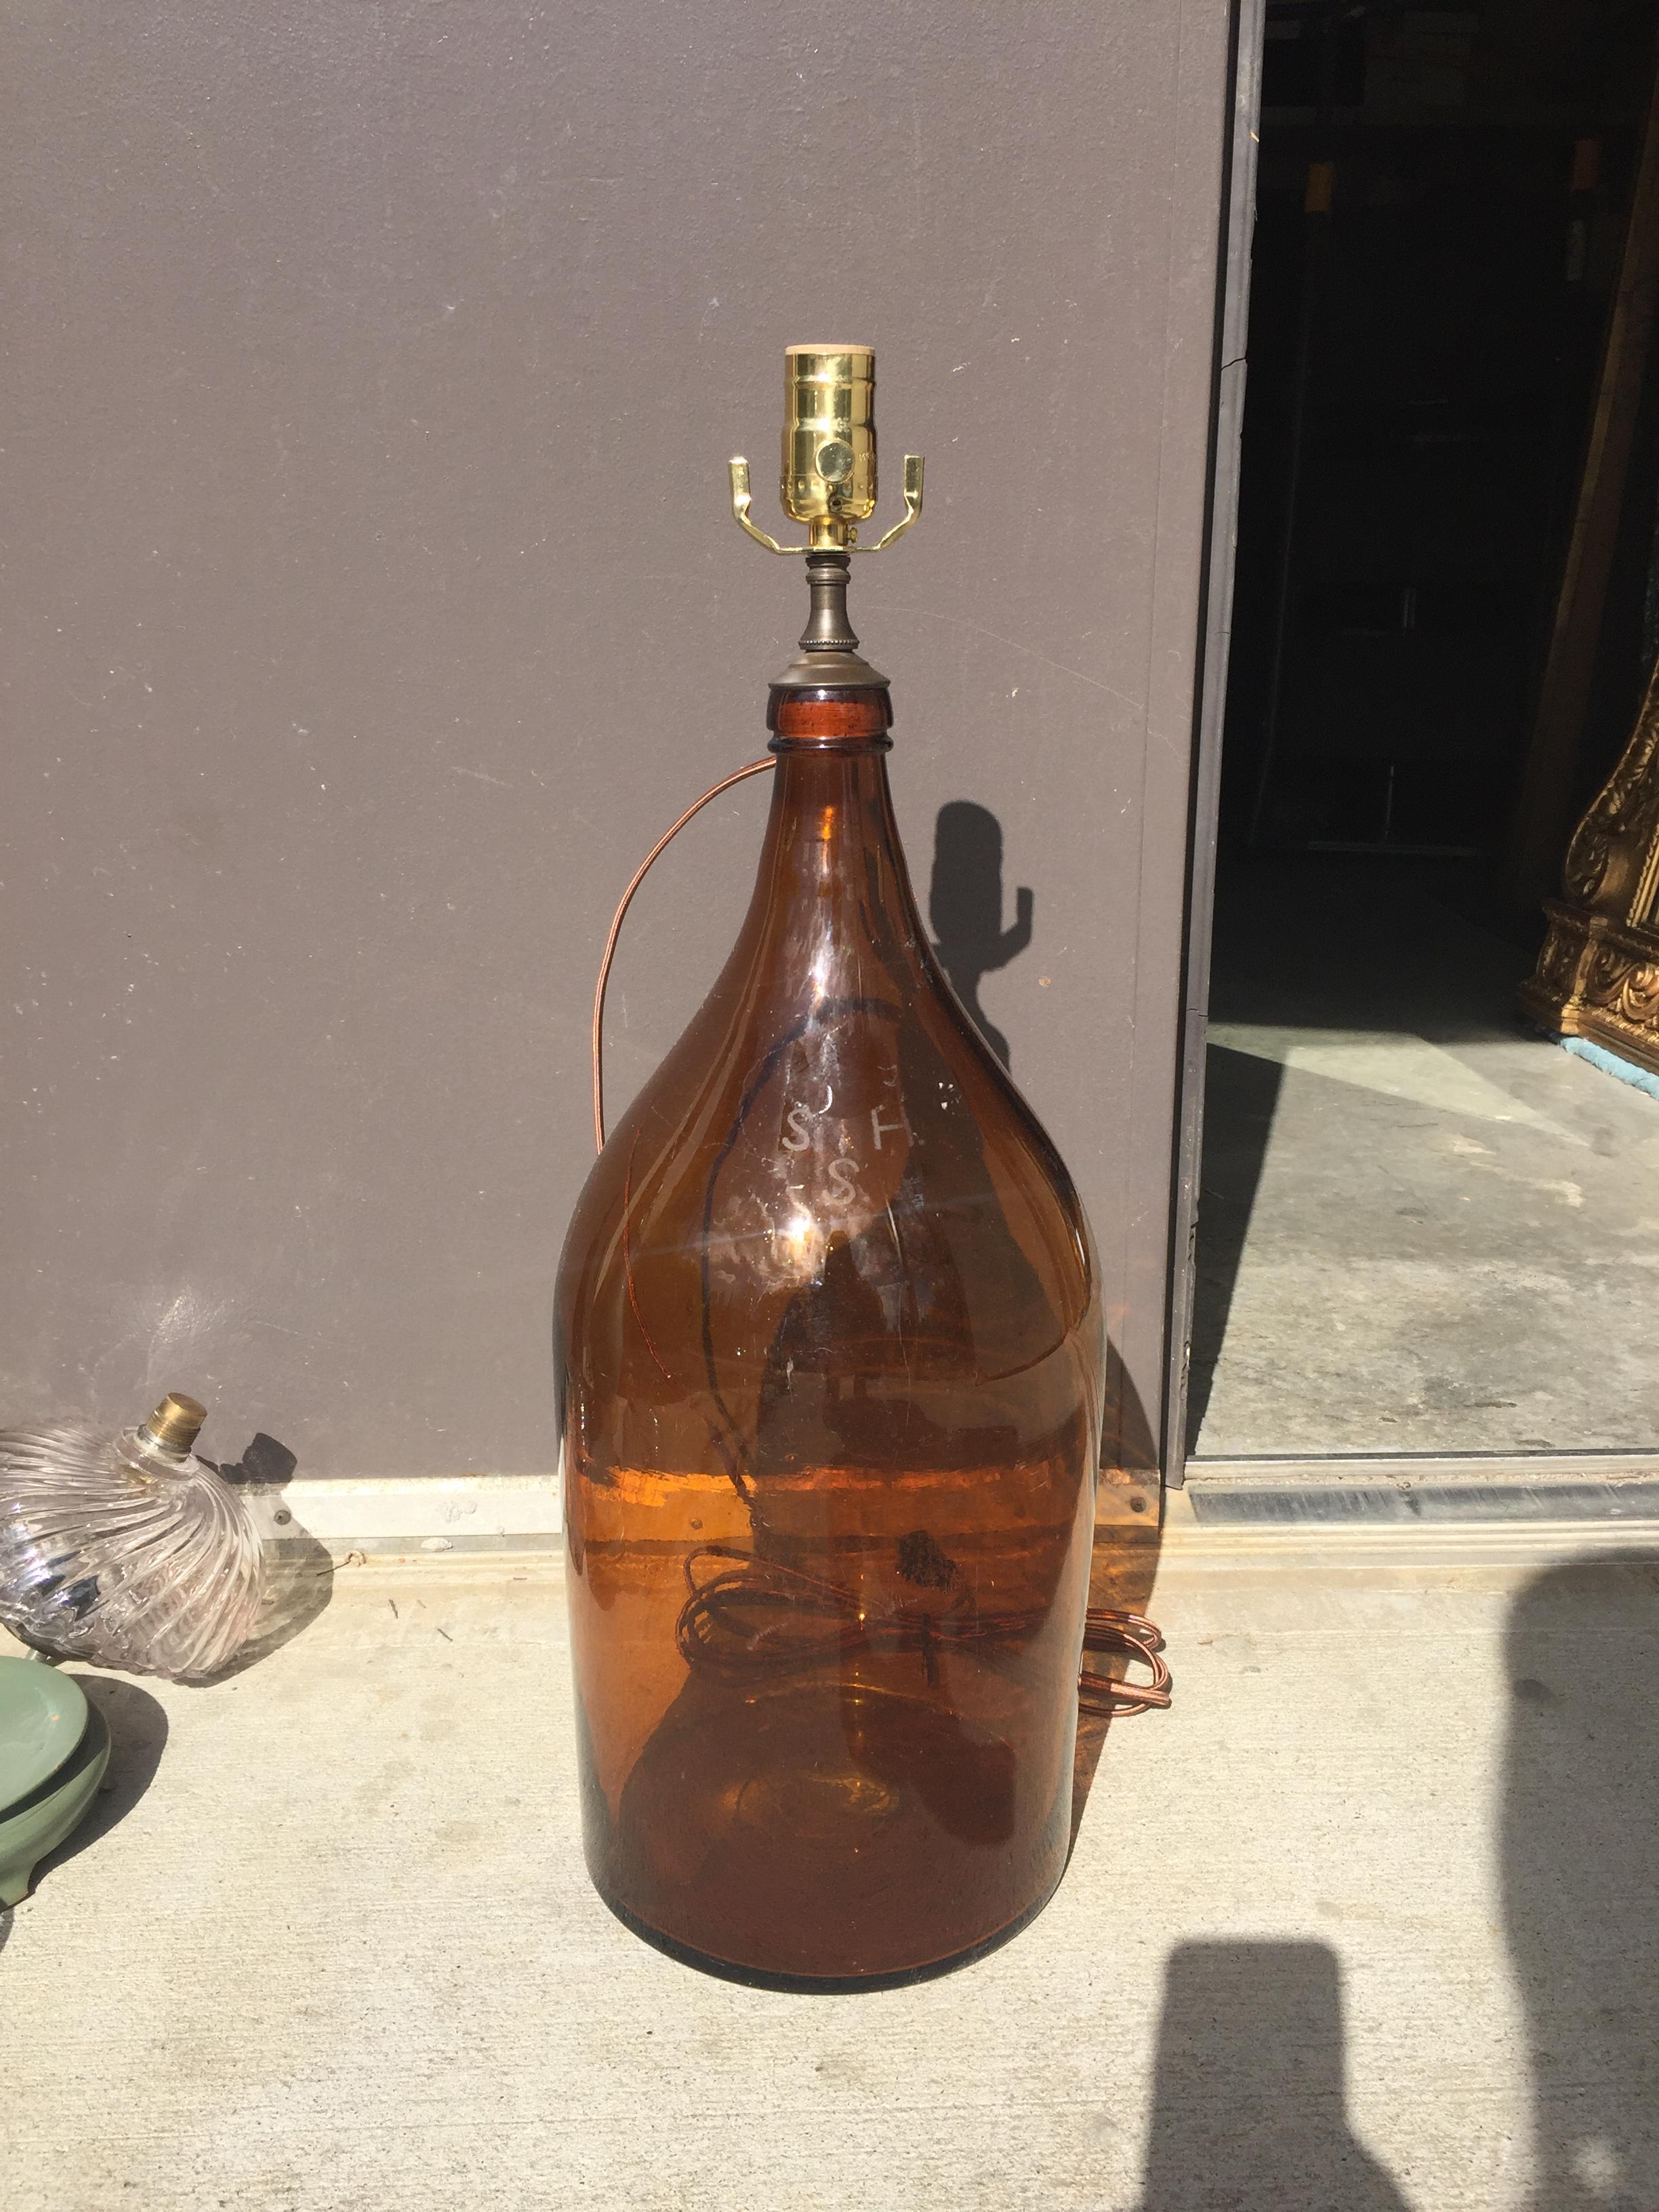 19th-20th century amber glass bottle as lamp
New wiring.